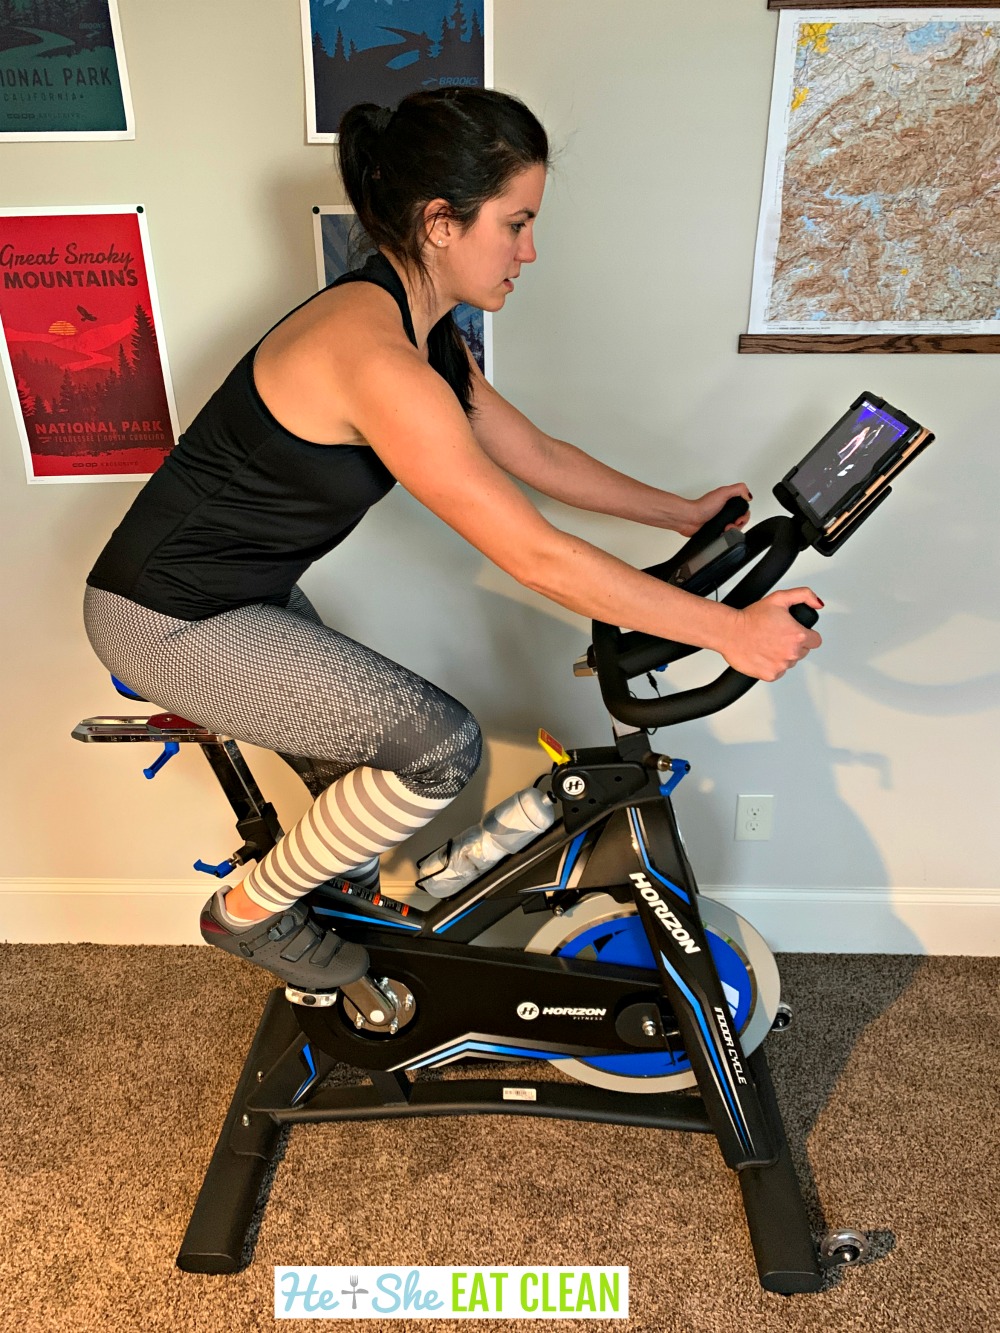 Cycling 30-Minute Indoor Workout